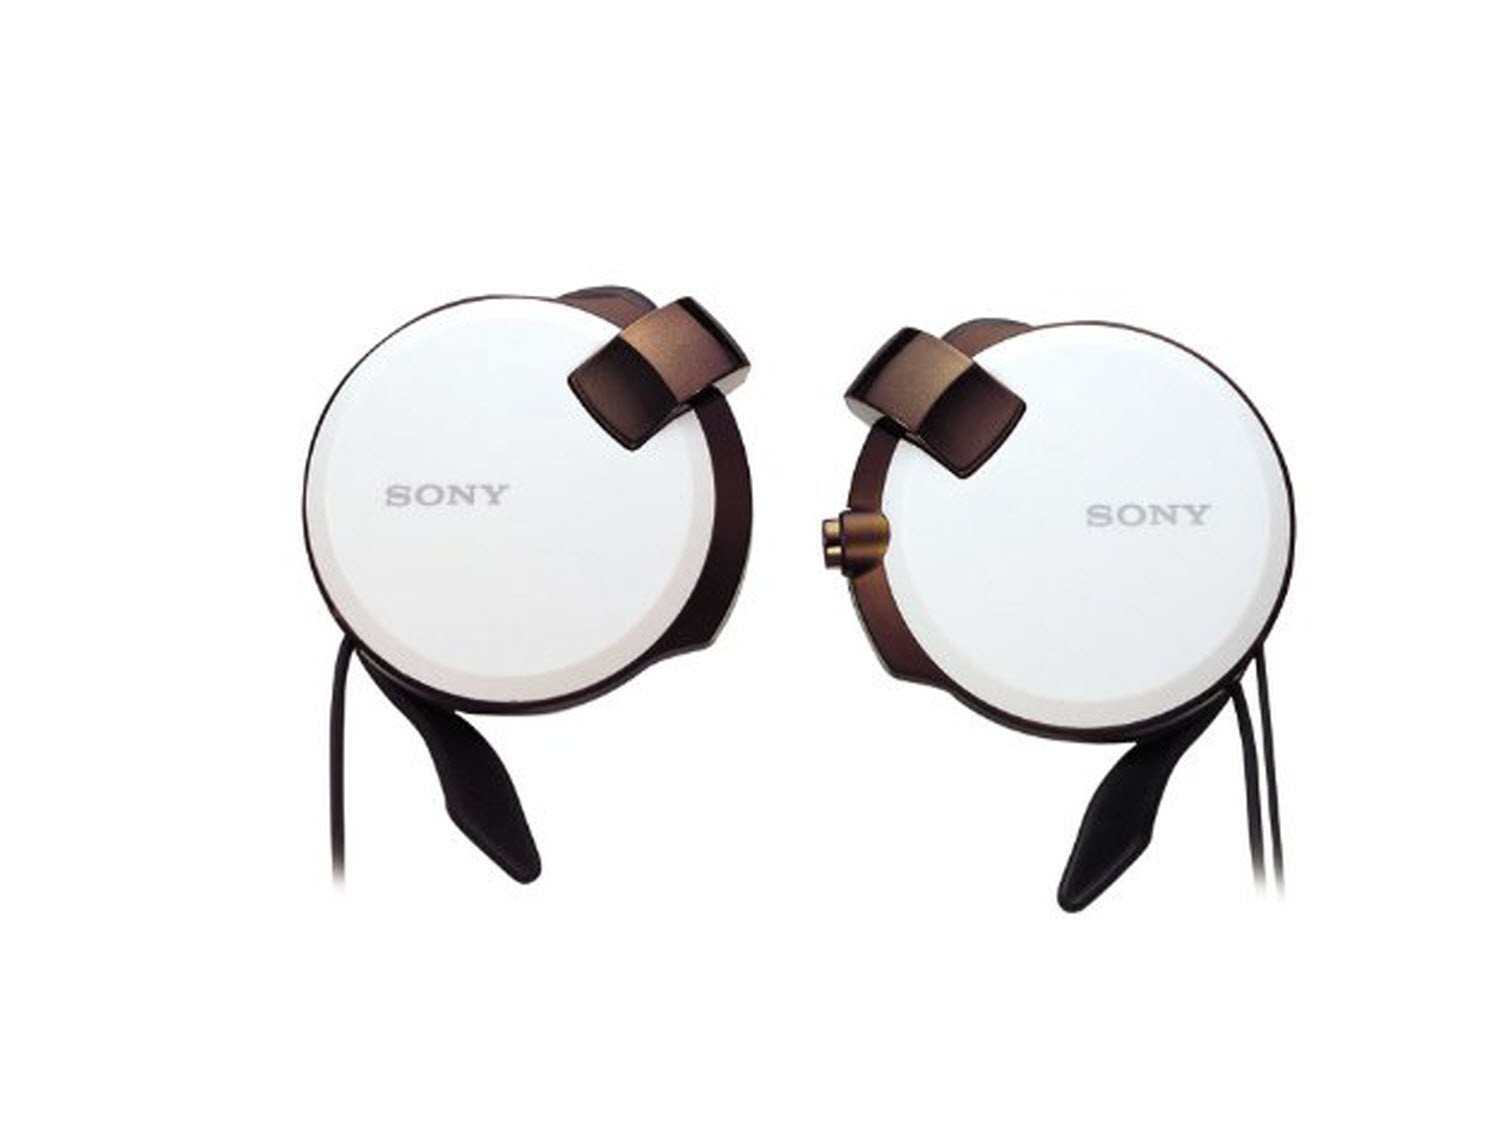 Sony Clip-on Stereo Headphones with Retractable